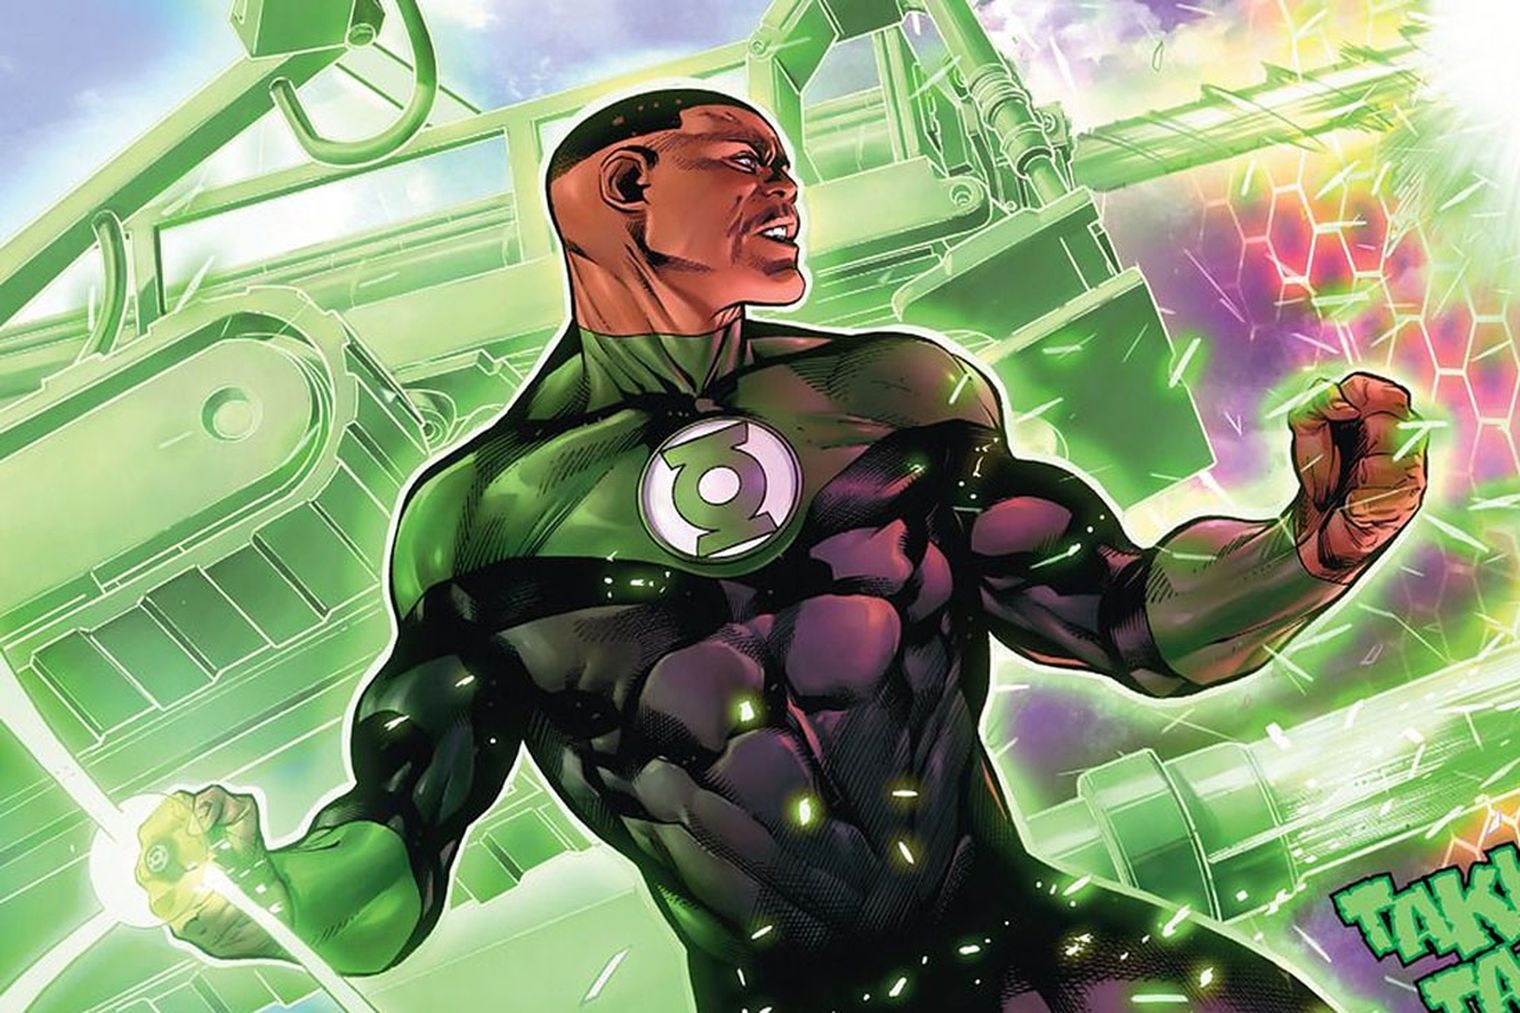 The writer of 12 Years a Slave is making a DC comic about marginalized heroes